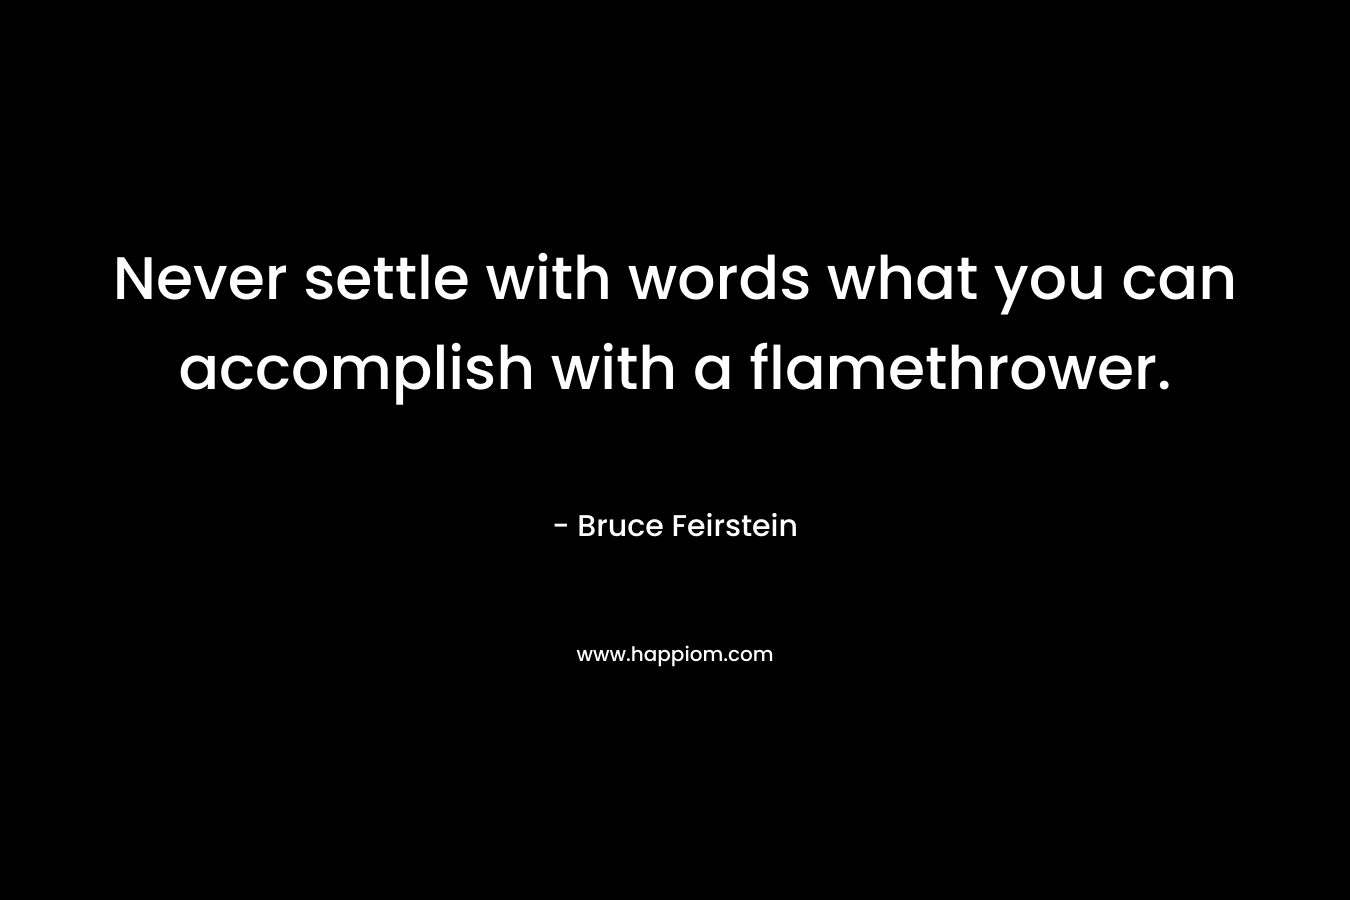 Never settle with words what you can accomplish with a flamethrower. – Bruce Feirstein